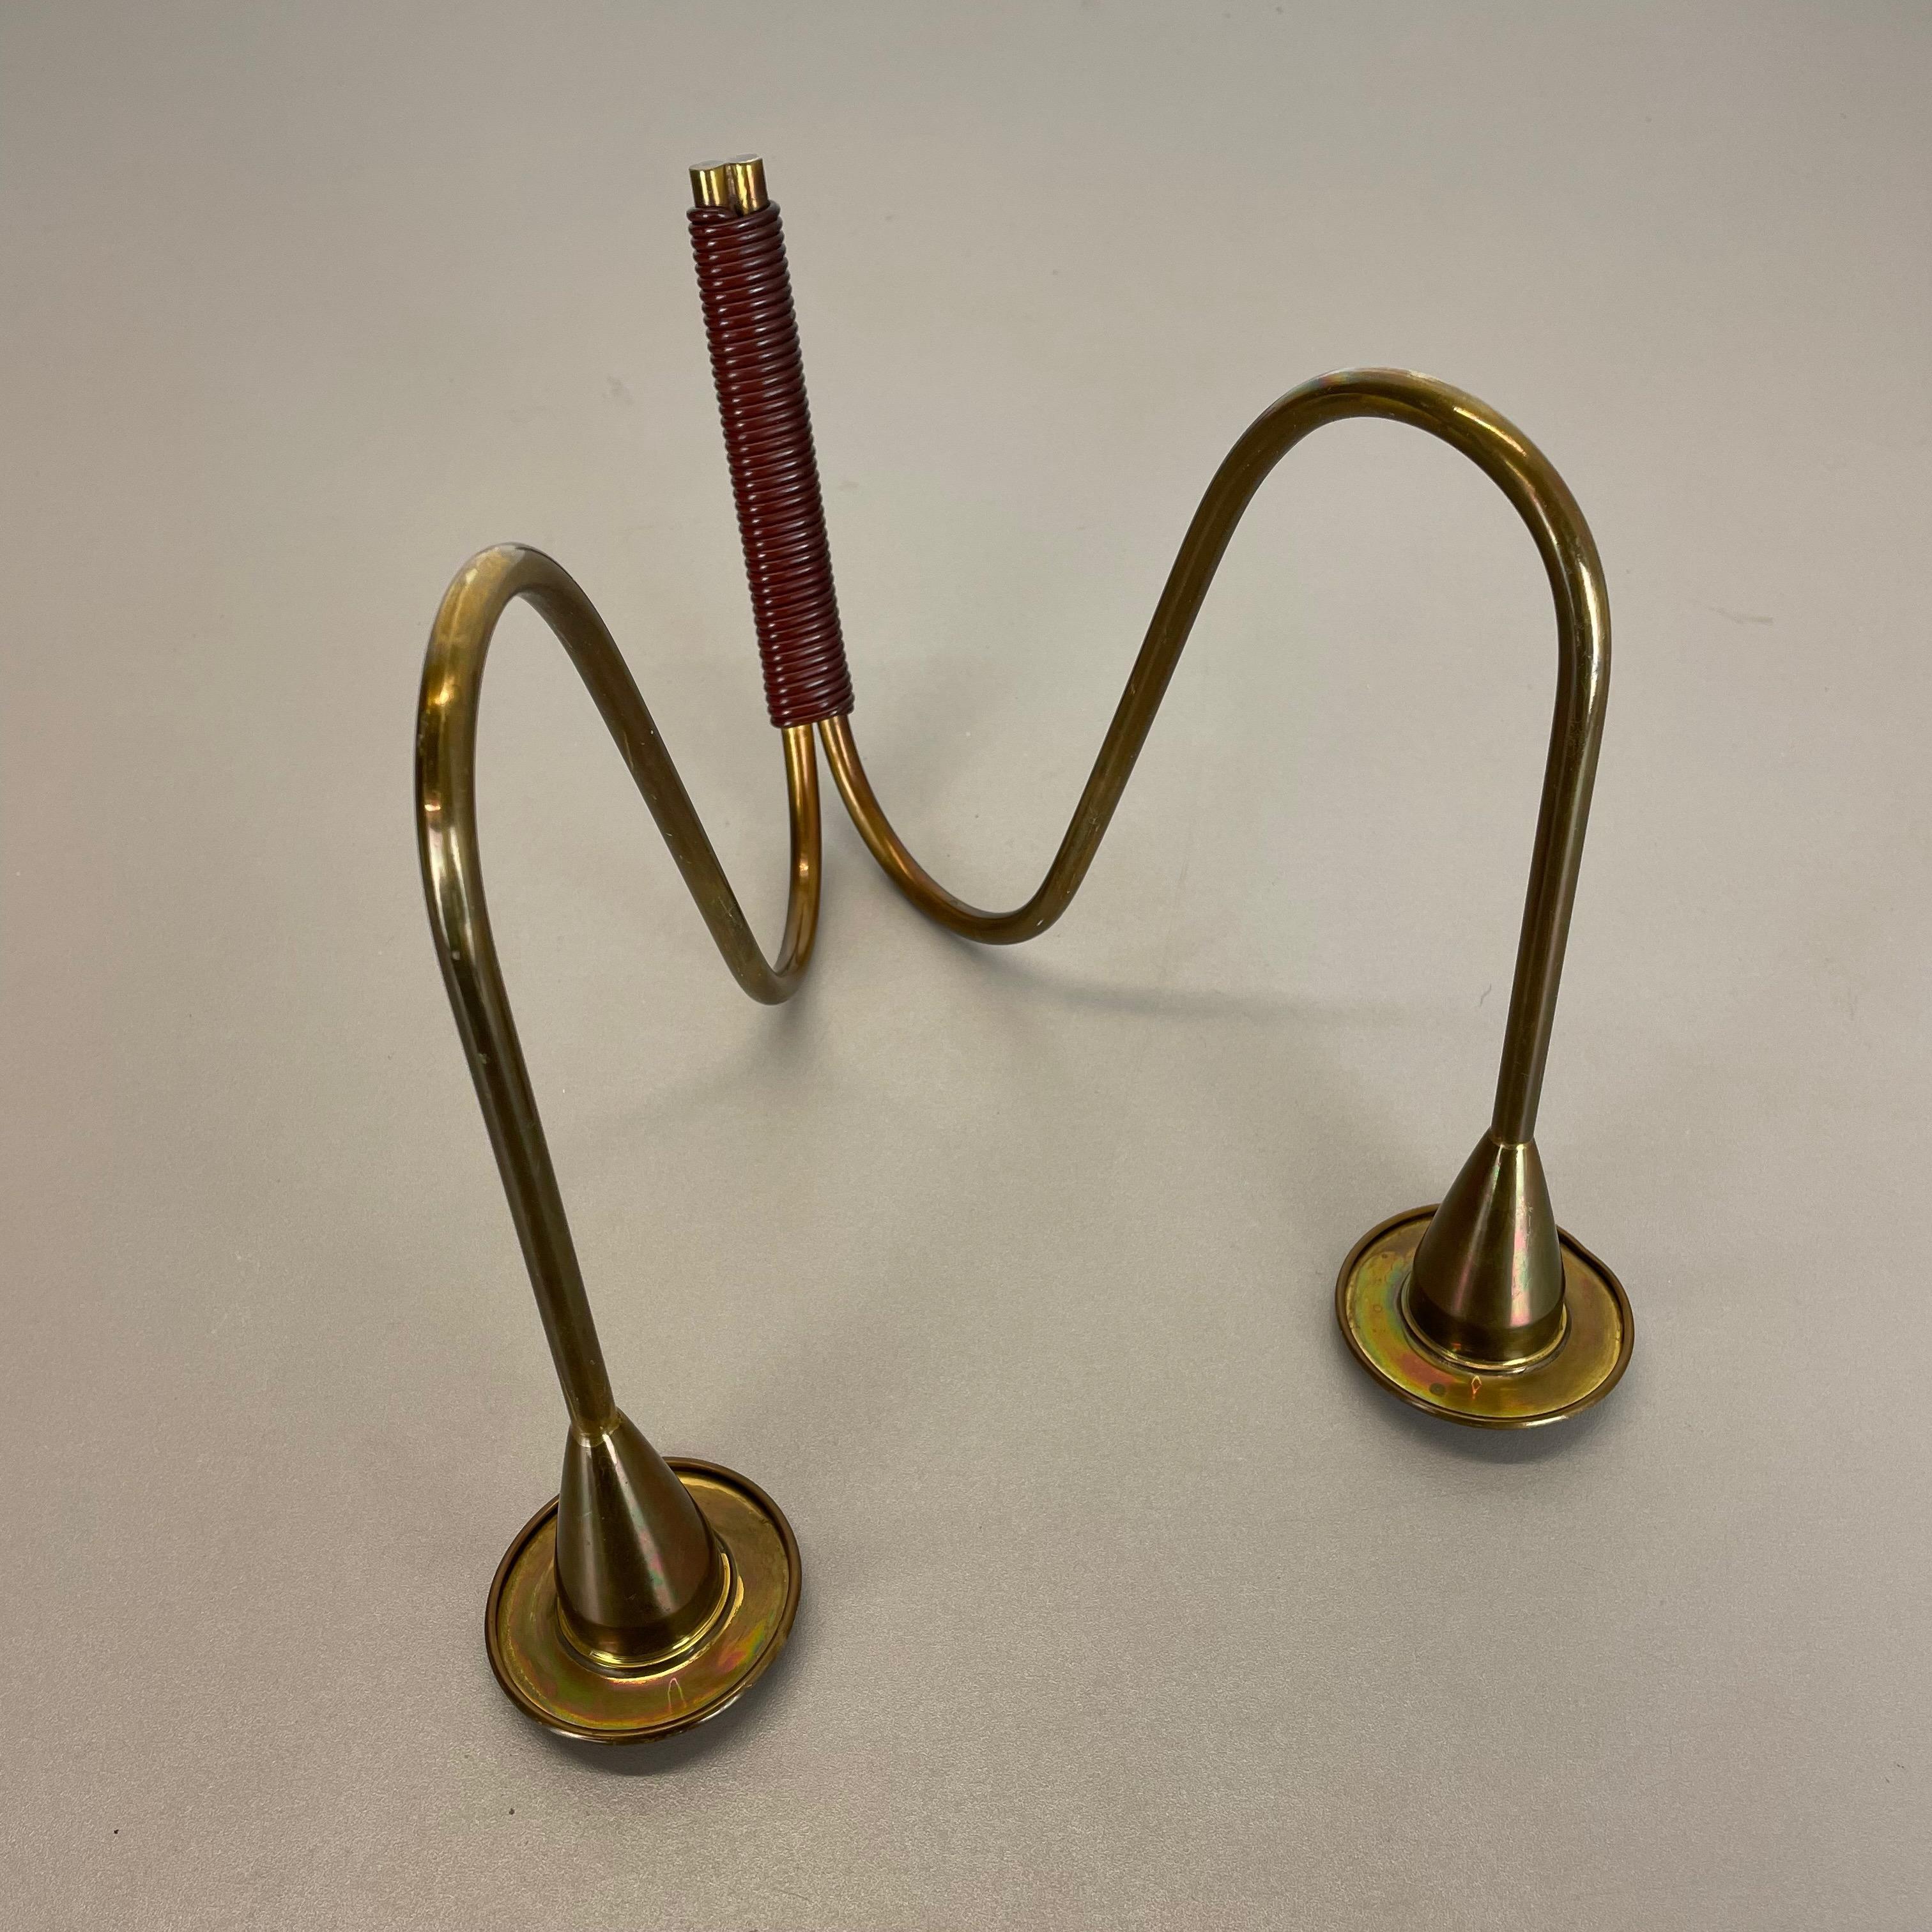 Sculptural Brass Candleholder Object by Günter Kupetz for WMF, Germany 1950s For Sale 10